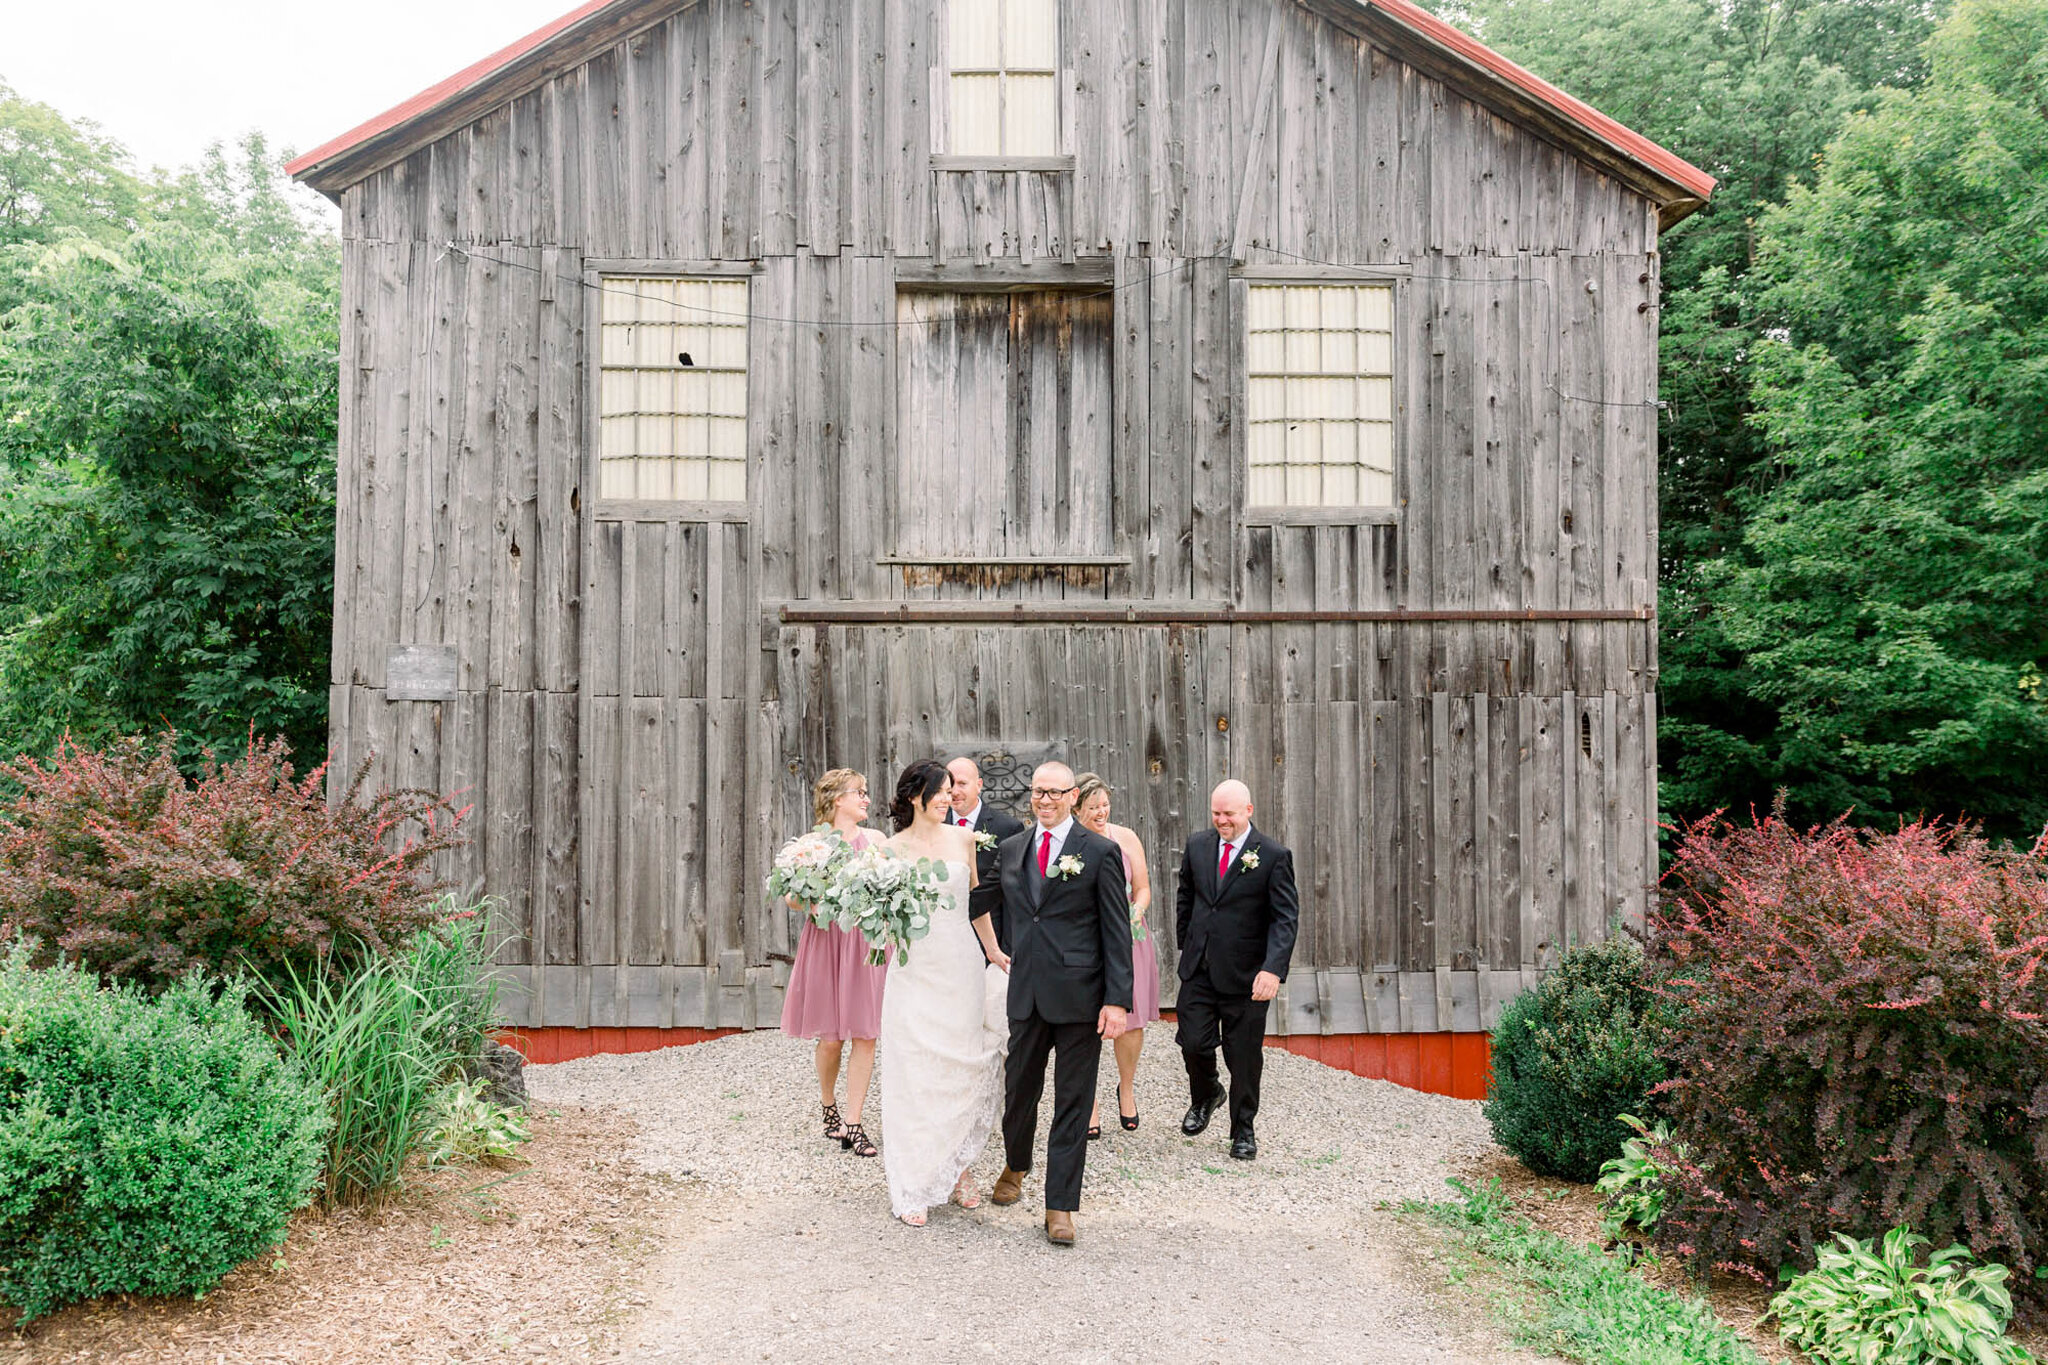 Wedding portraits in front of rustic barn at Walters Falls Inn a